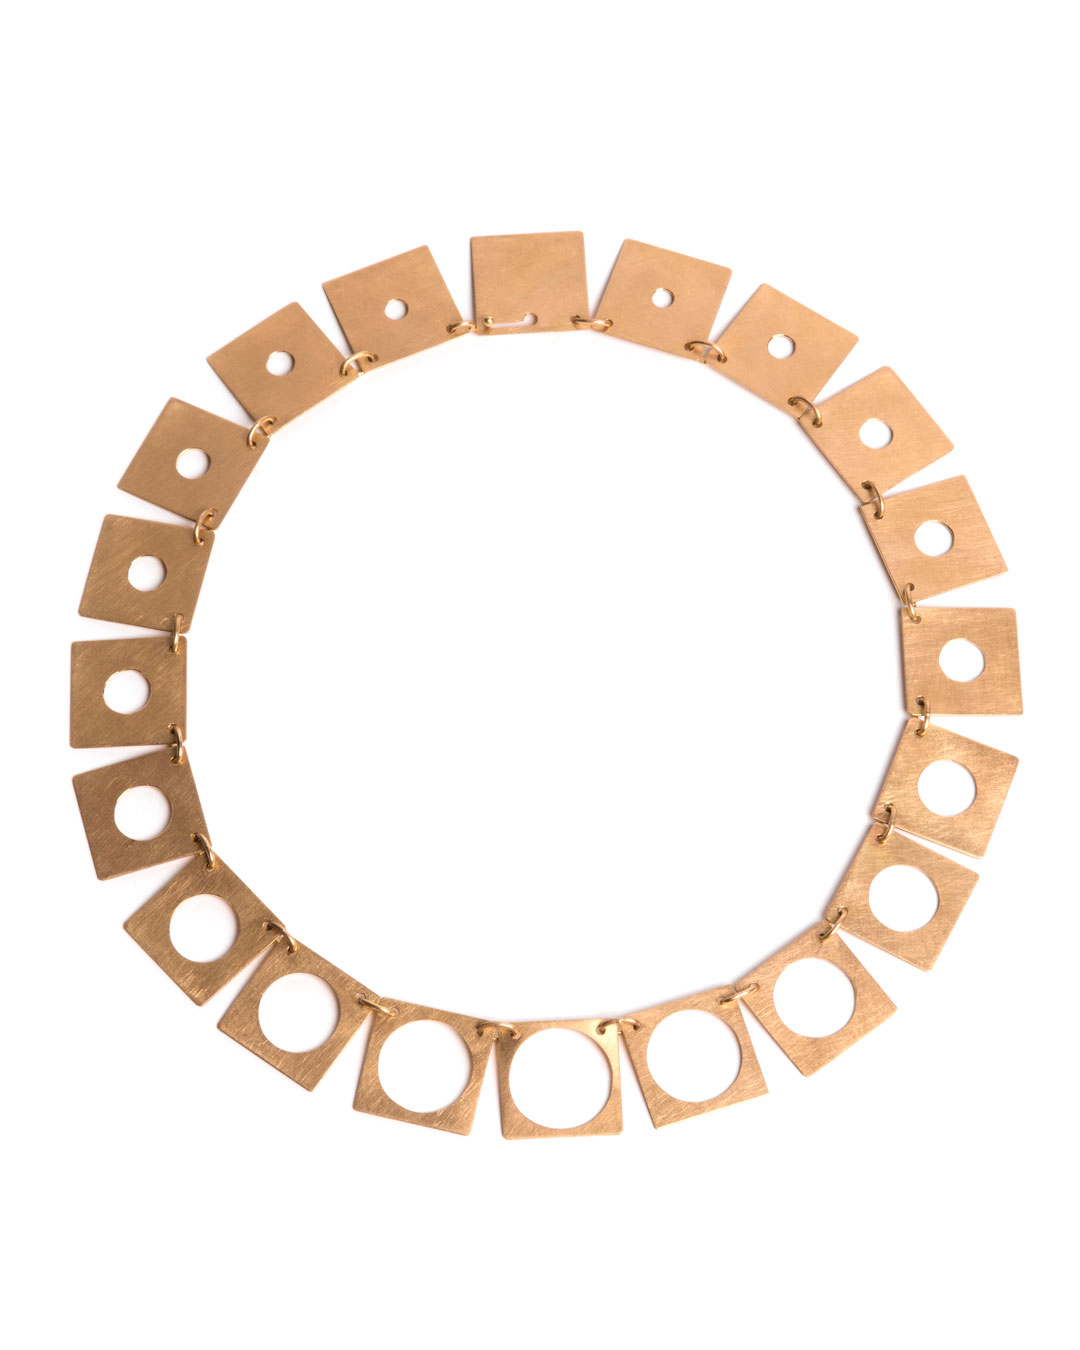 Herman Hermsen, Holes, 2012, necklace; 18ct gold, 170 x 170 x 2 mm, price on request